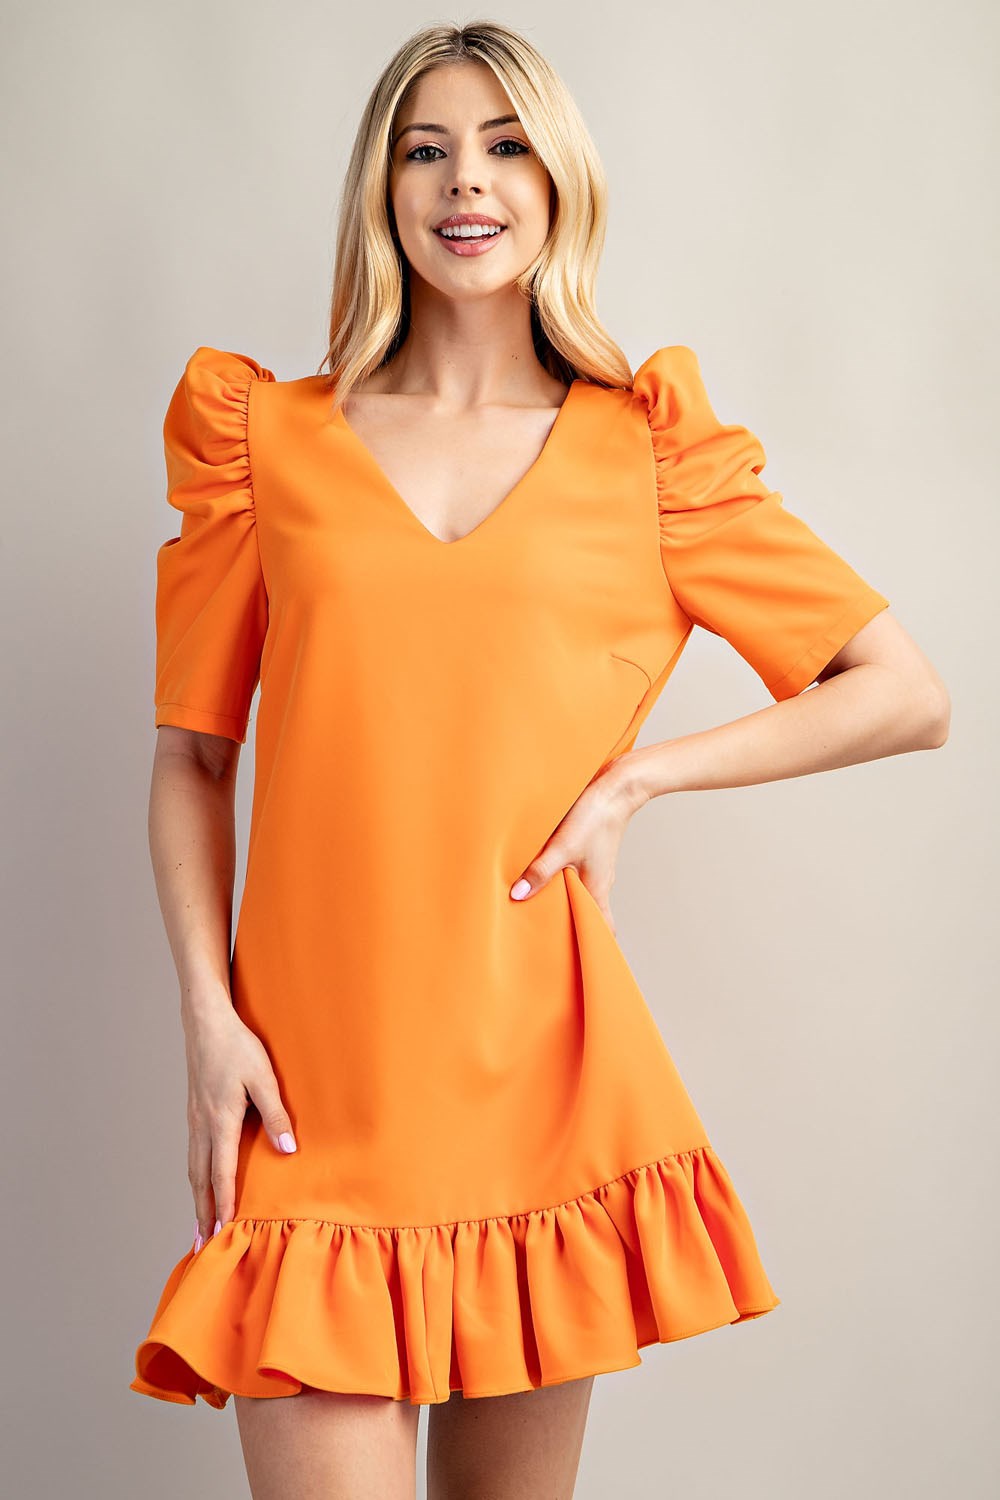 Orange mini dress with puff sleeves, straight-cut neckline, and darted bodice